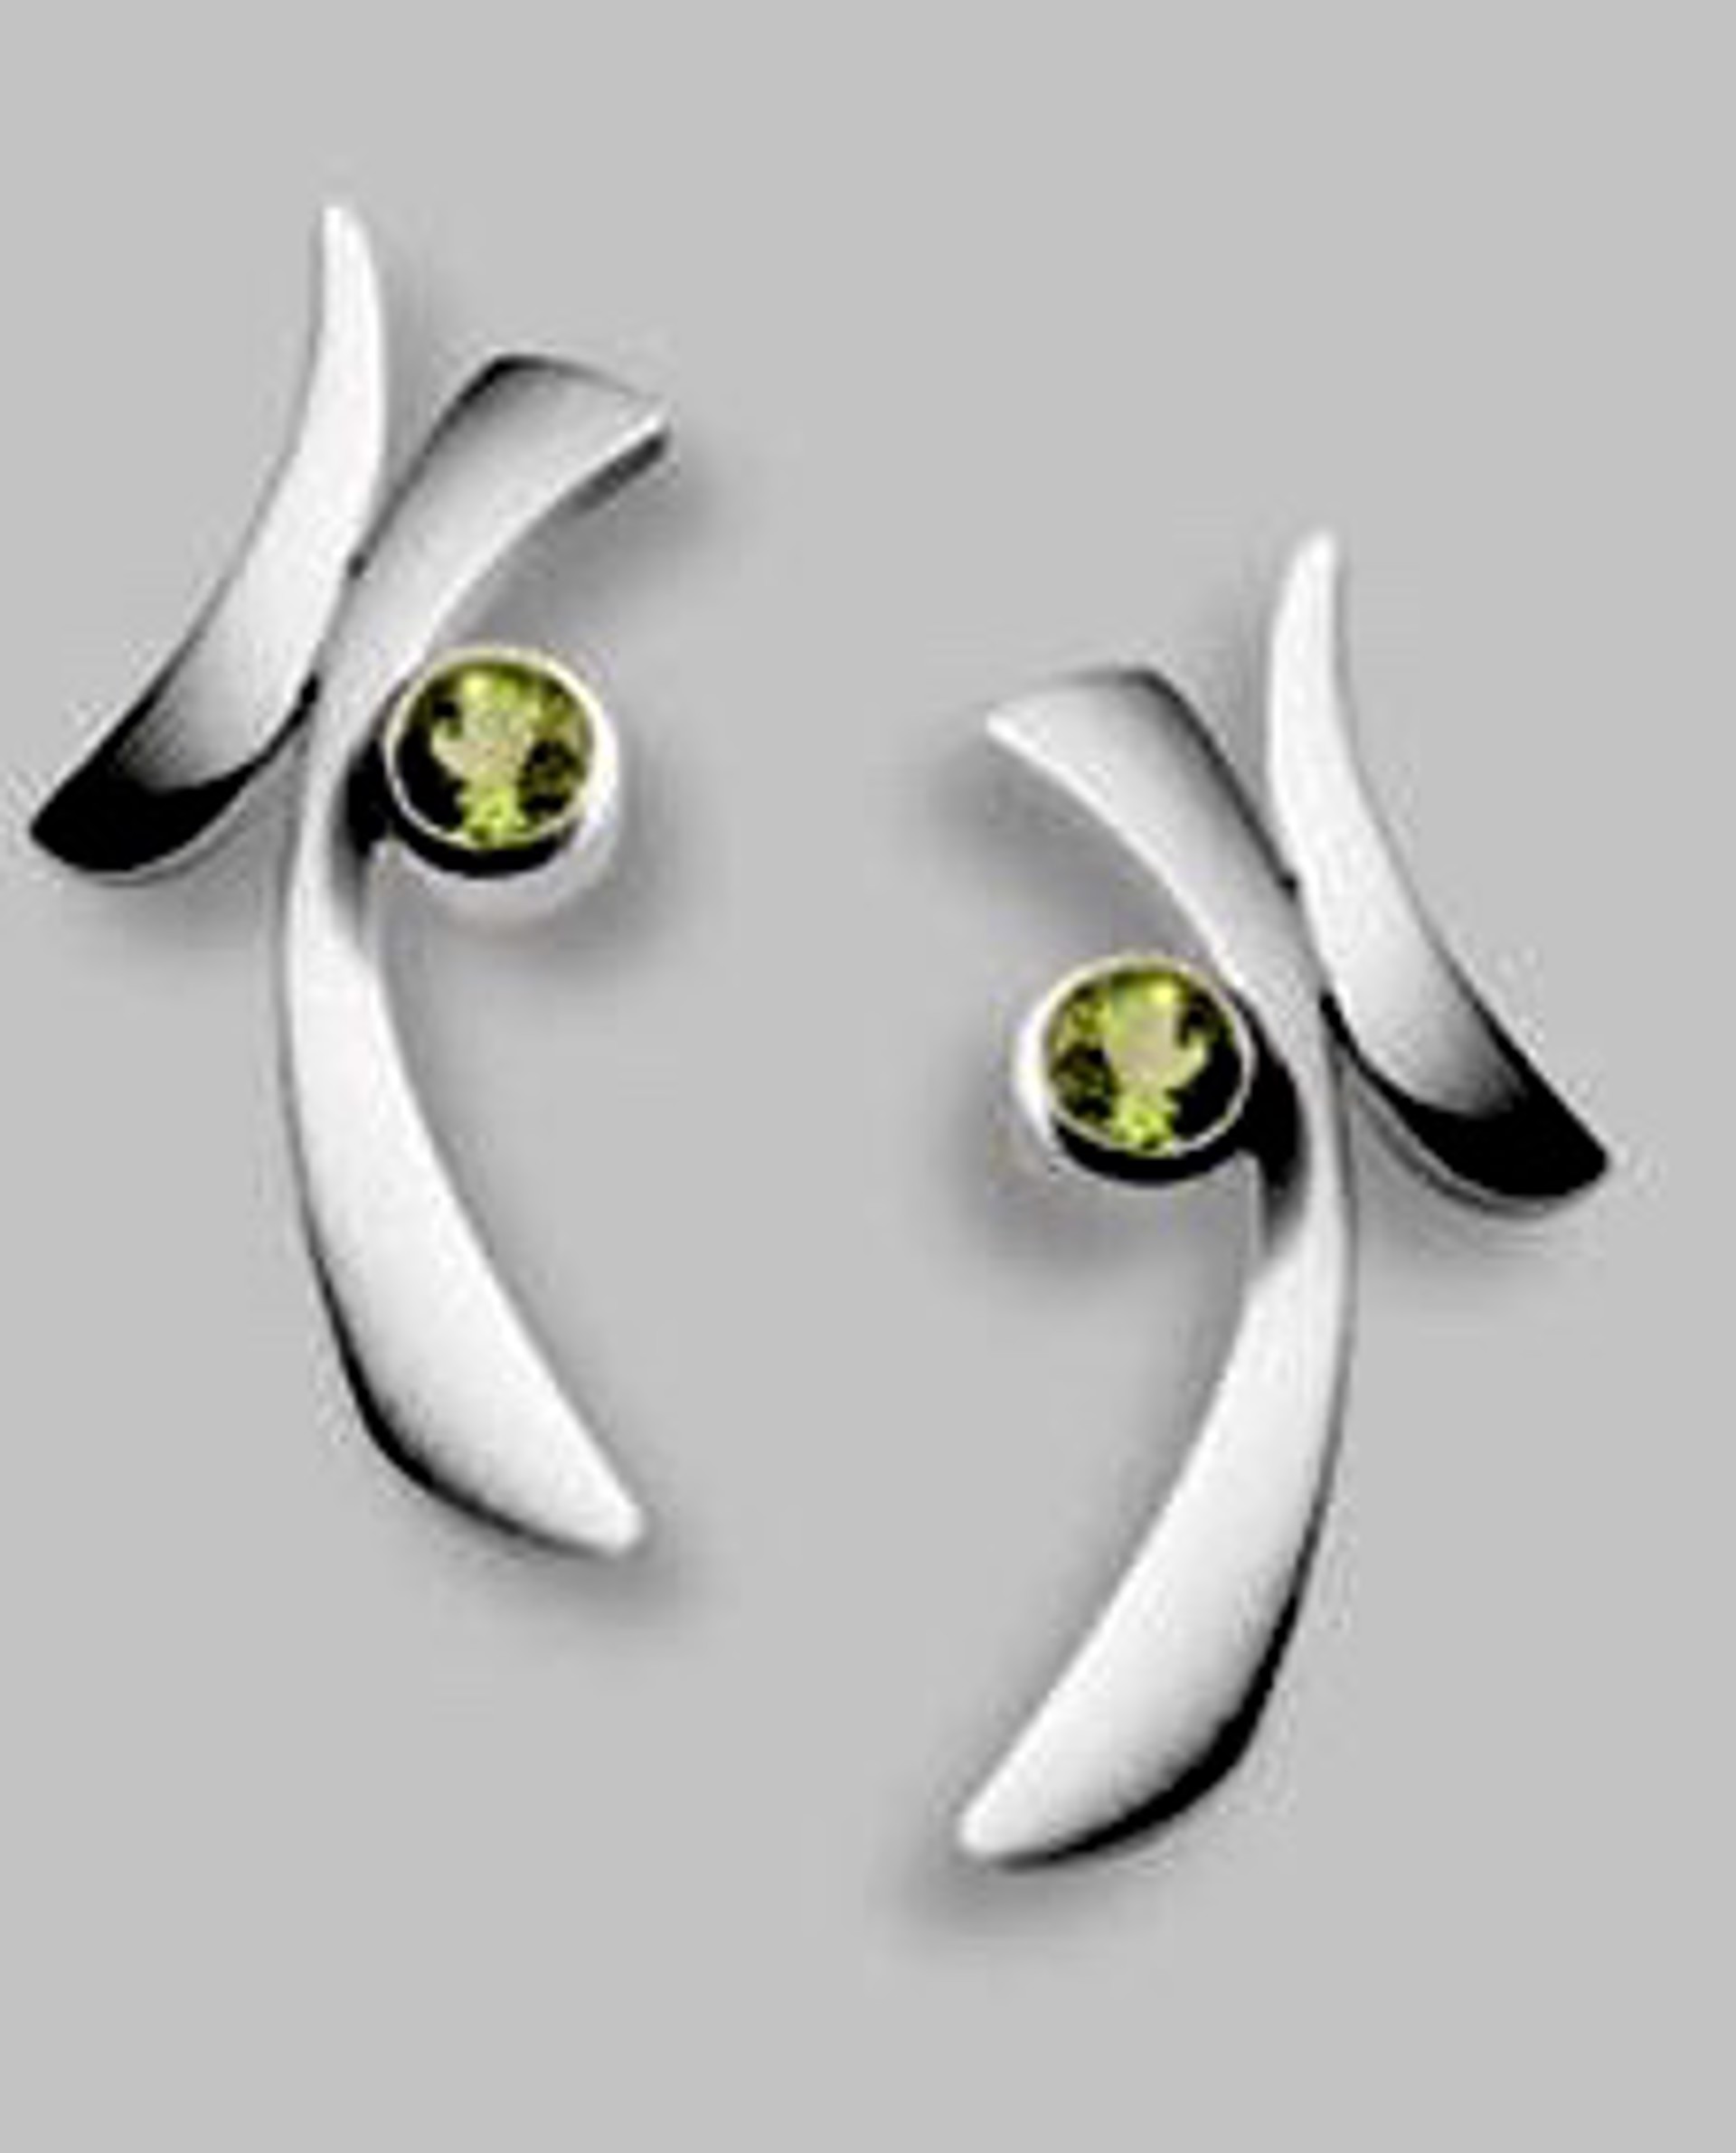 Earrings-Peridot,14 KT Gold and Sterling Silver Sticks and Stones by Joryel Vera